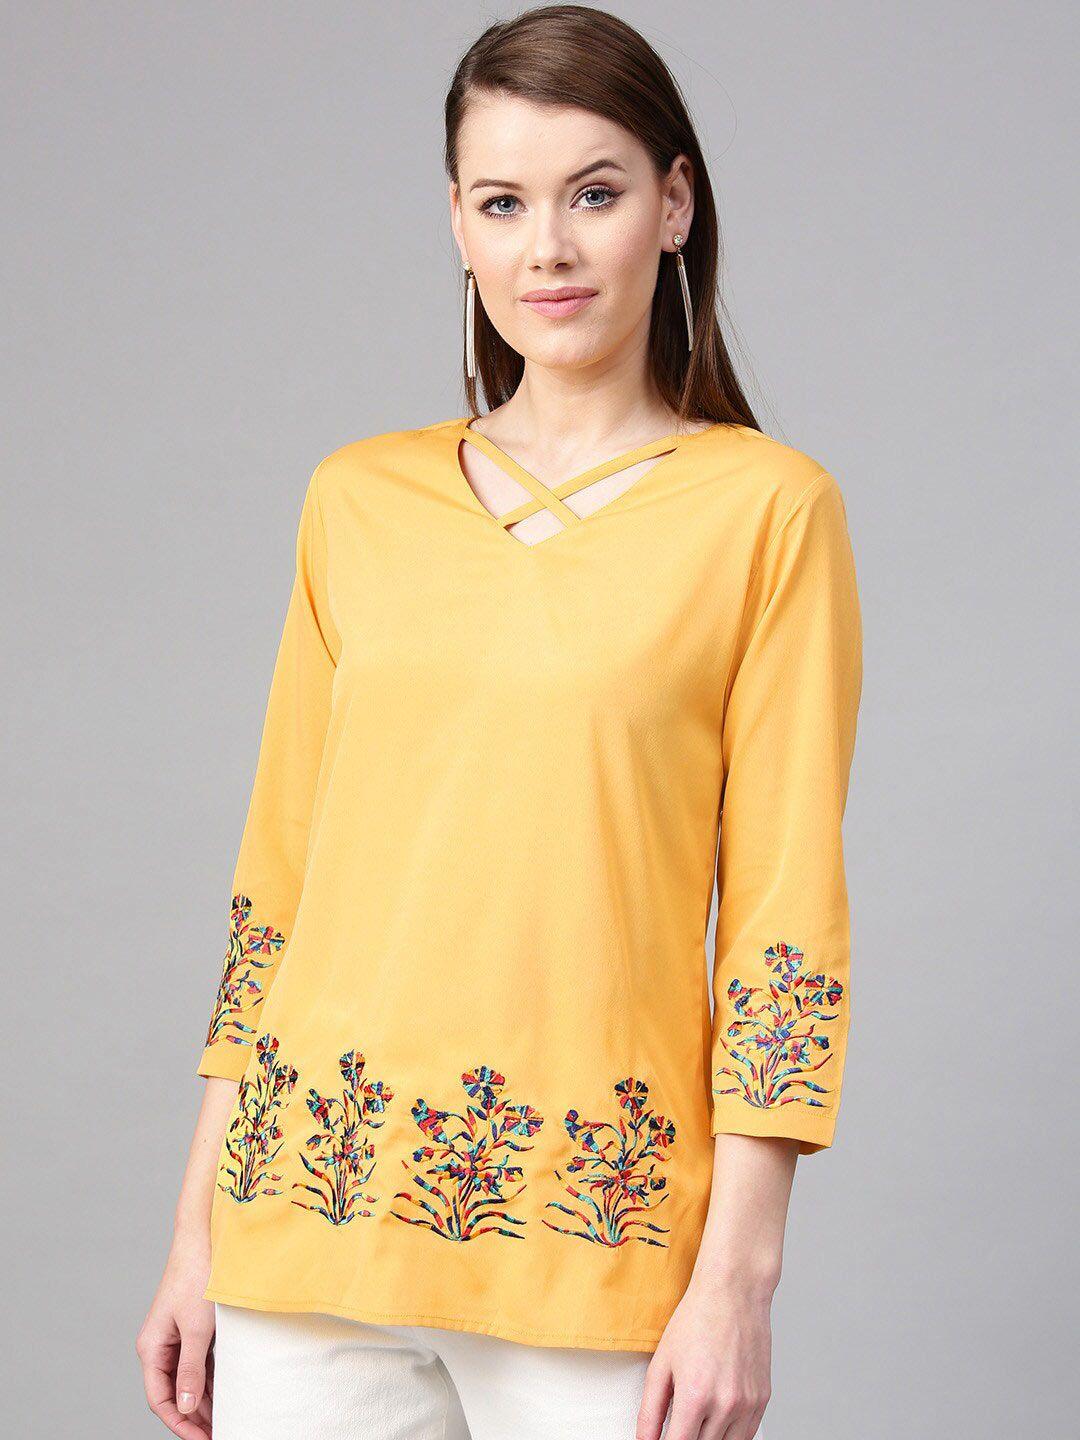 rare yellow floral embroidered v-neck top